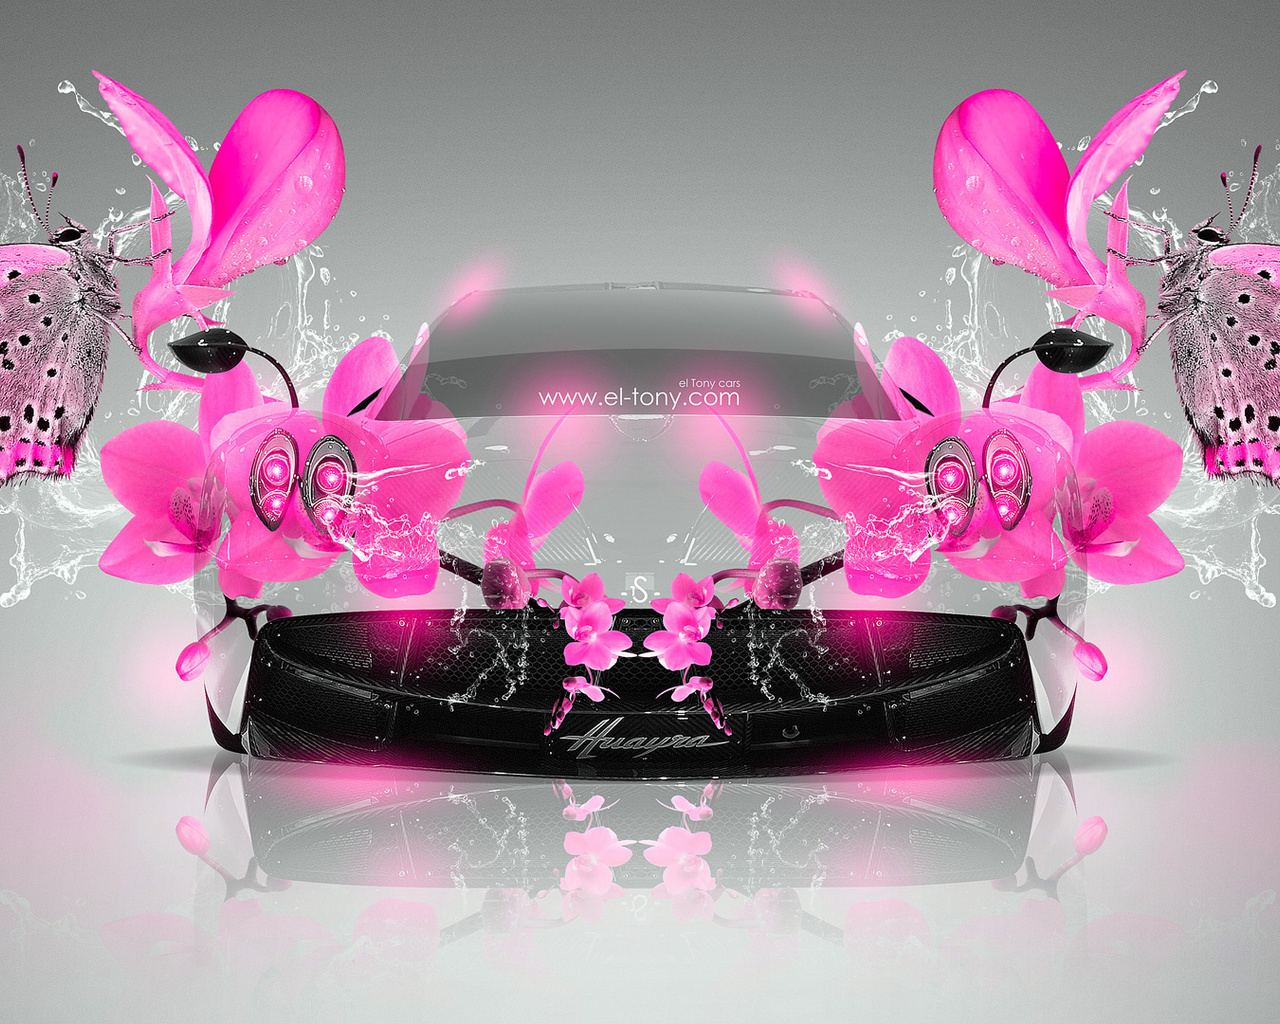 tony kokhan, pagani, huayra, fantasy, flowers, butterfly, water, pink, colors, glamour, el tony cars, photoshop, design, art,  , , , , , , , , , , , , , , , 